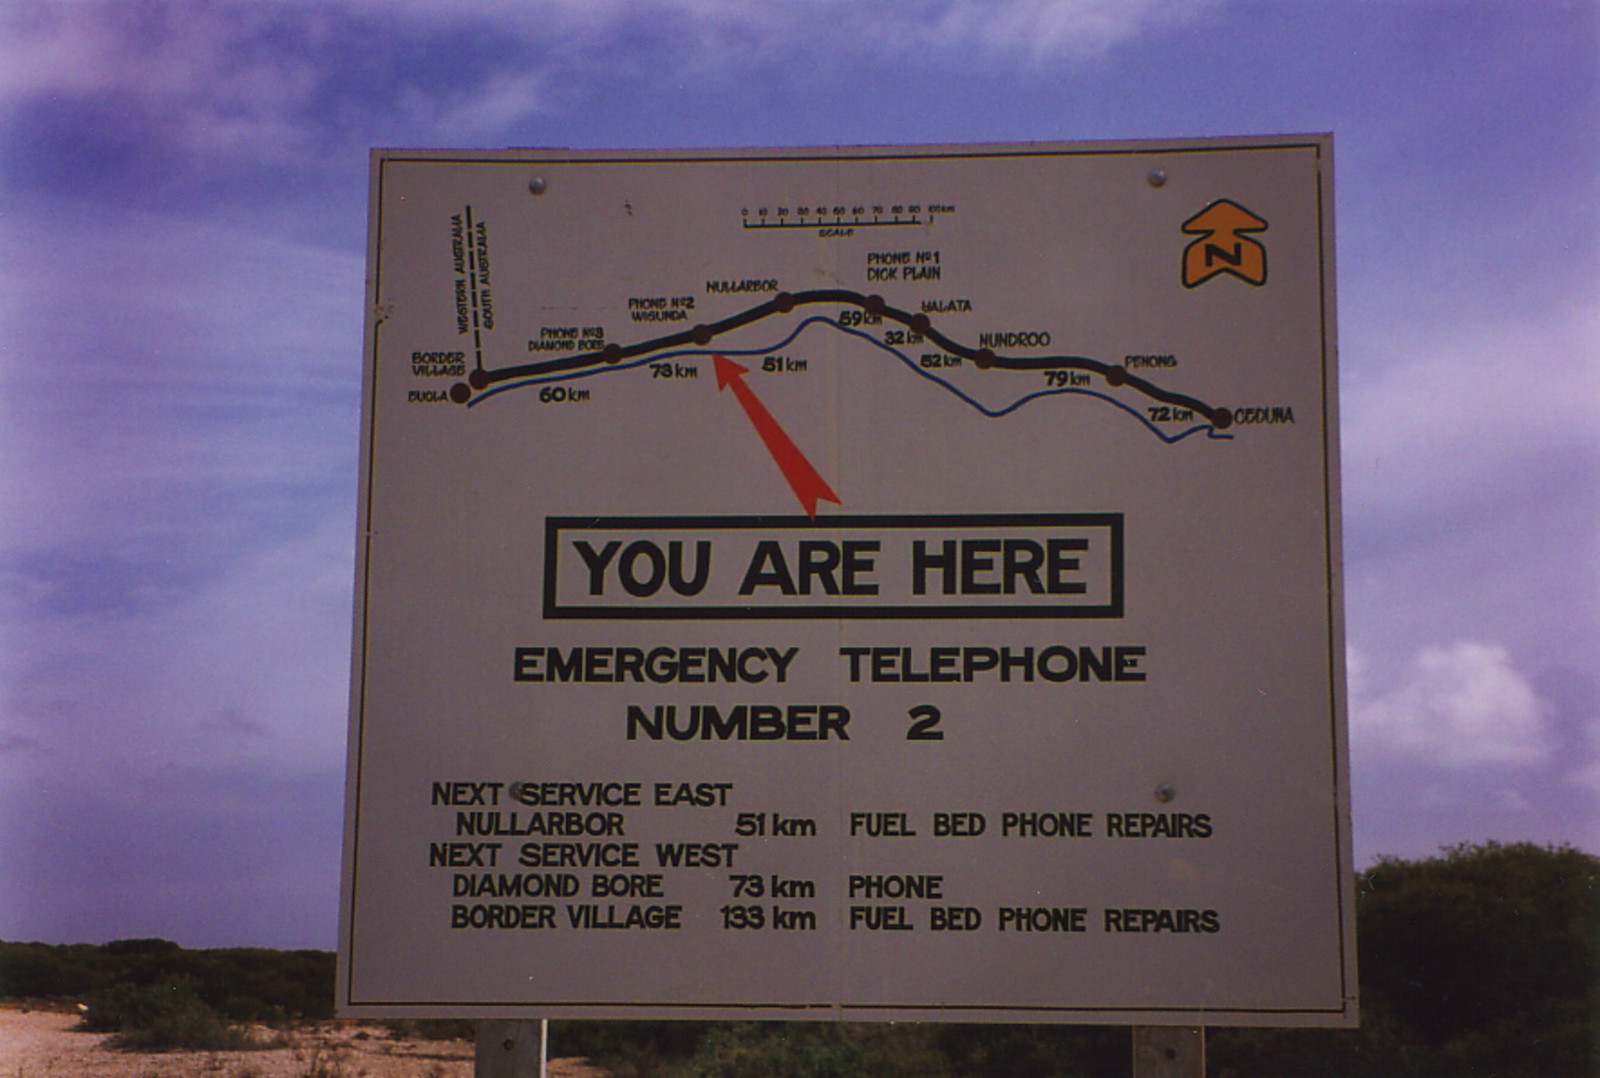 A sign showing the location of emergency telephones